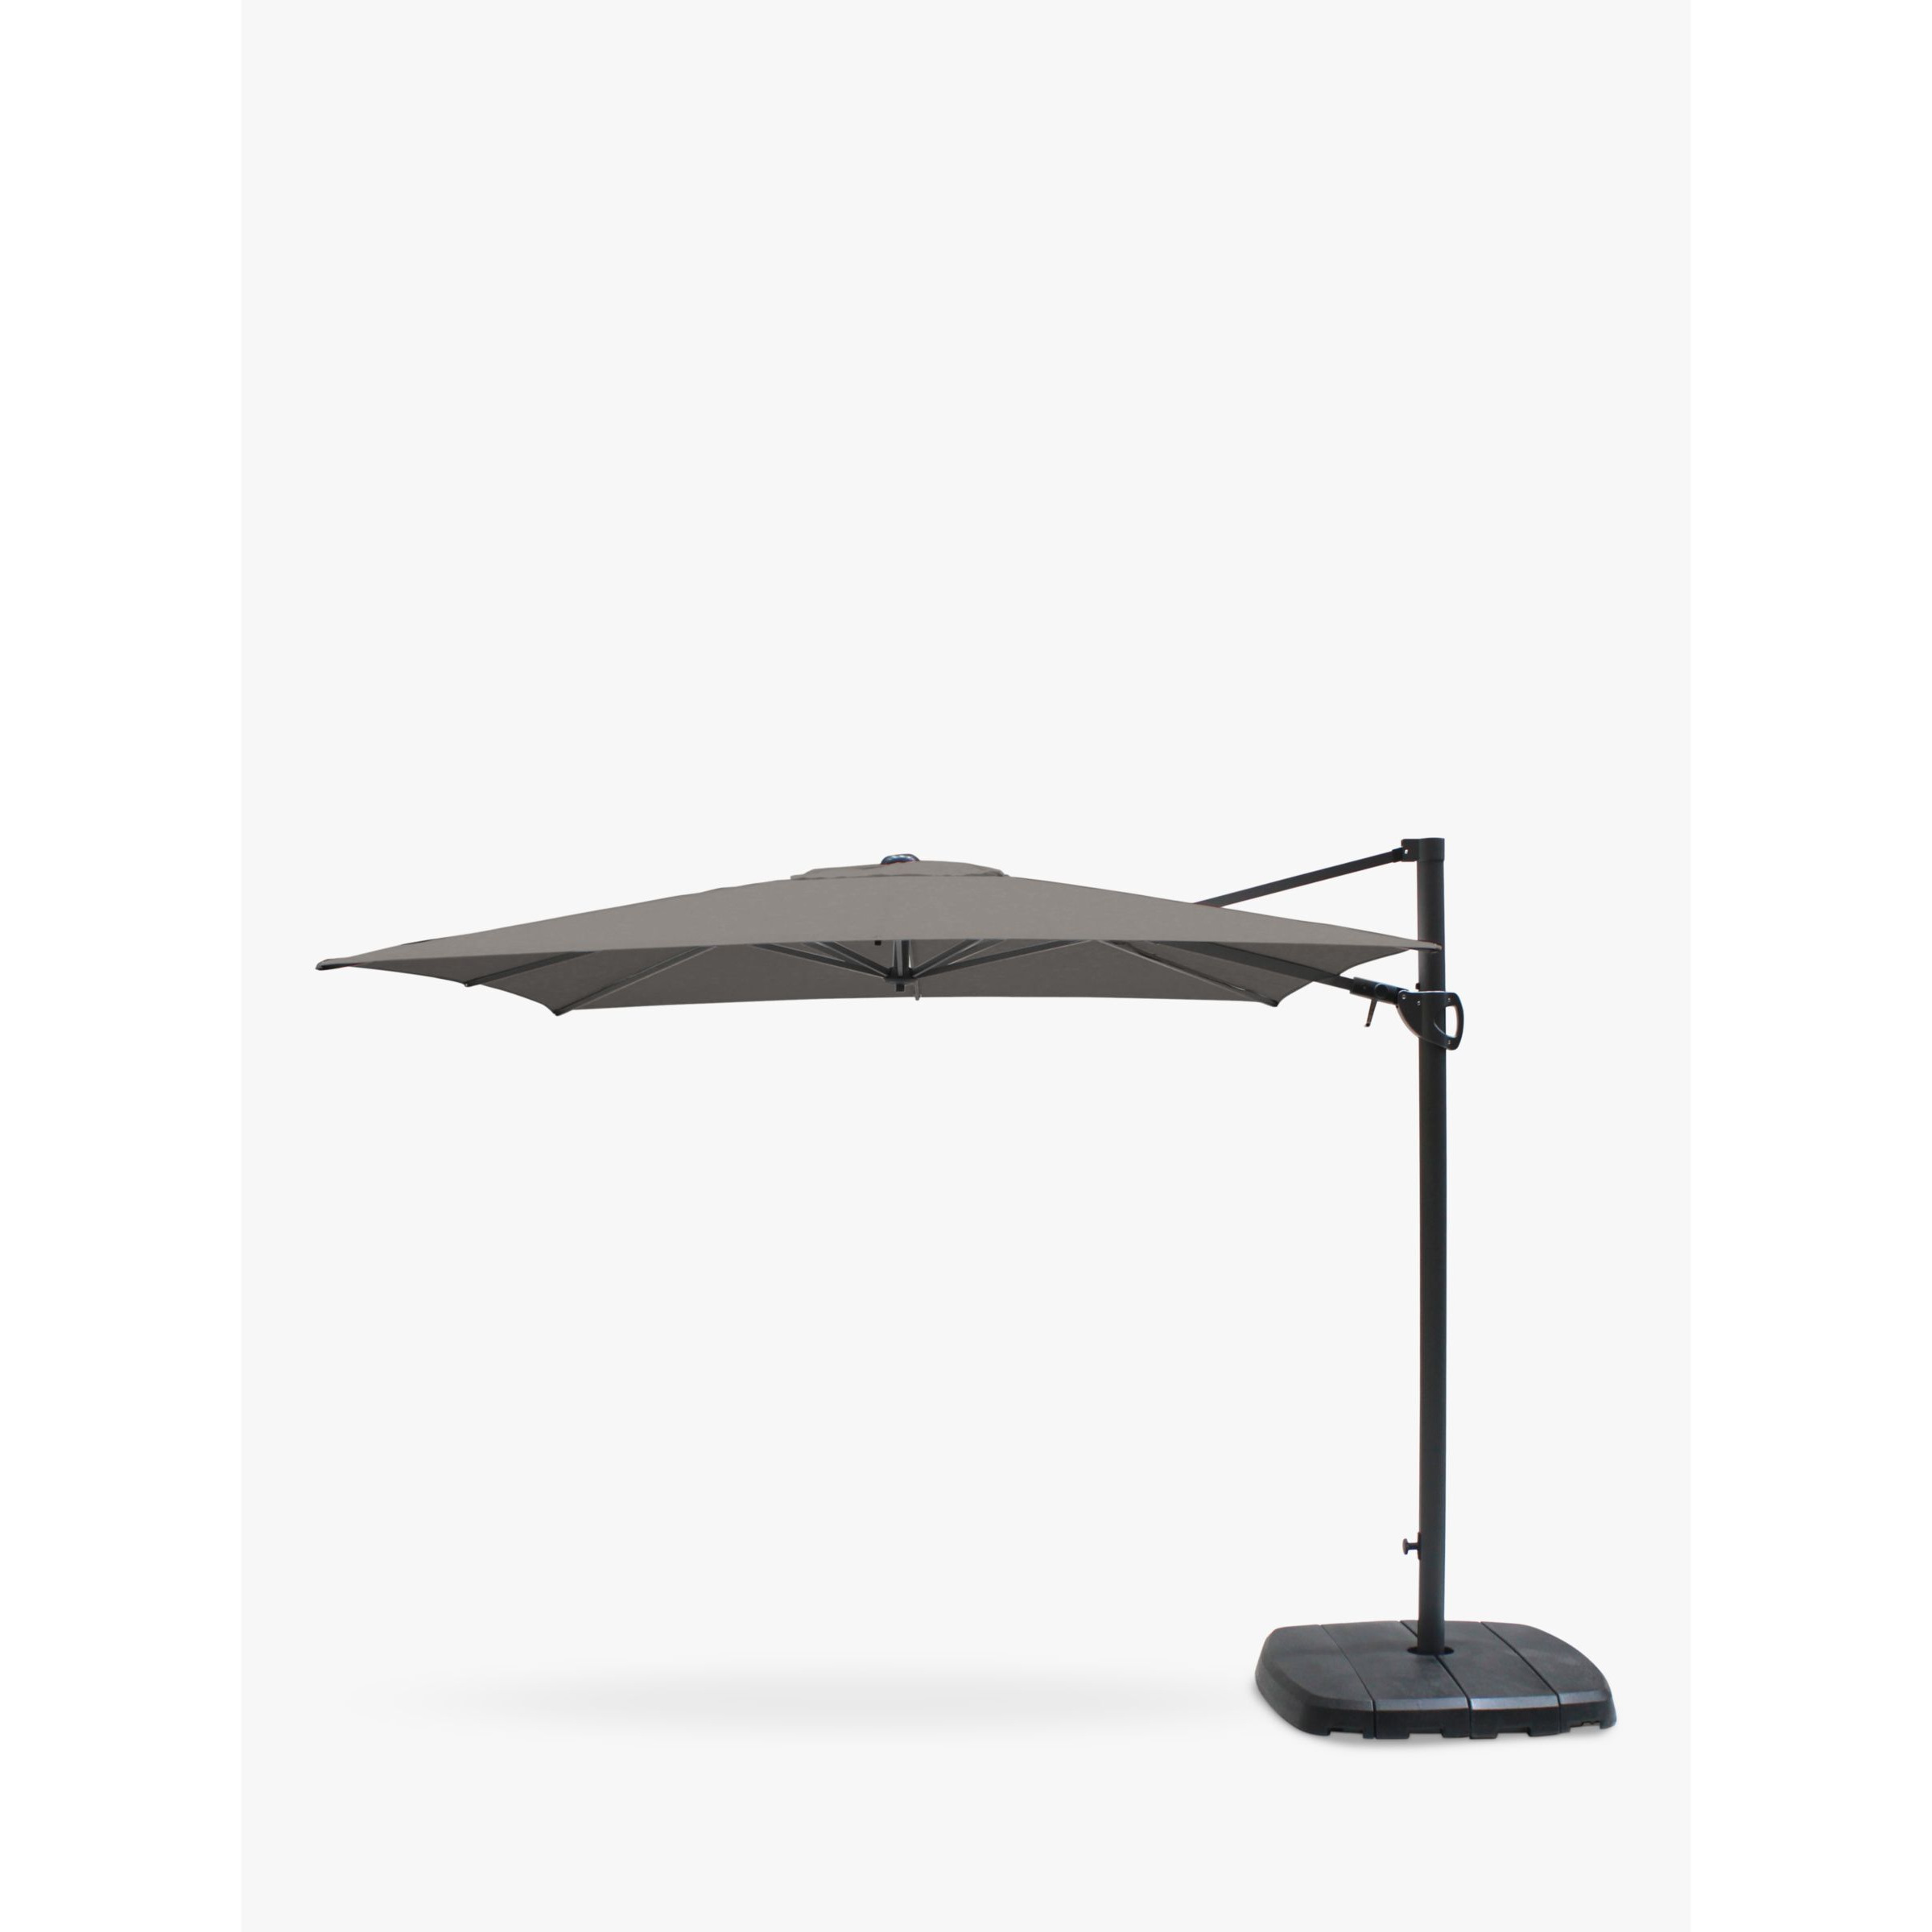 KETTLER Free Arm Square Garden Parasol with Base, 2.5m - image 1